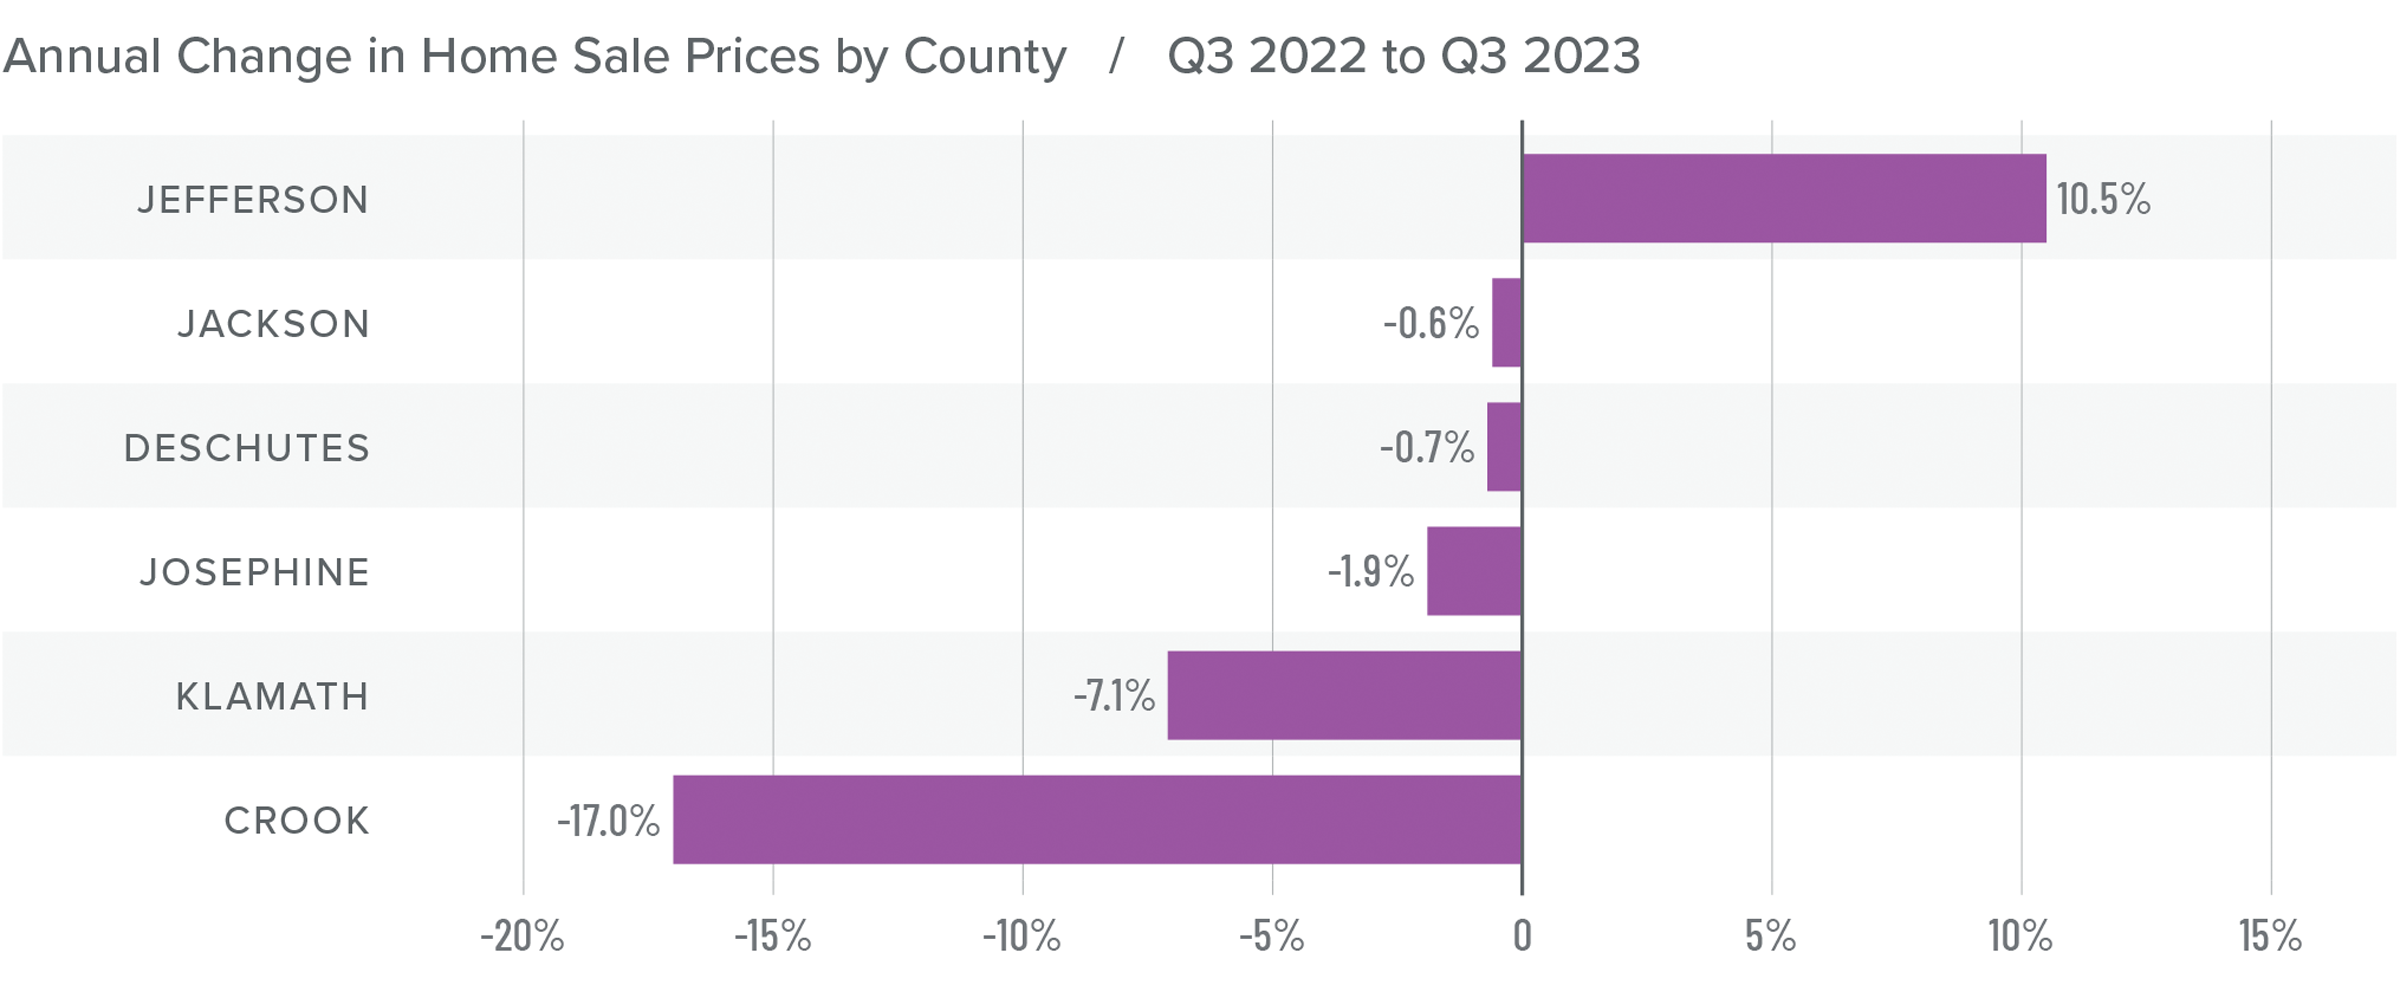 A bar graph showing the annual change in home sale prices by county in Central and Southern Oregon from Q3 2022 to Q3 2023. Jackson County is represented by the bar second from the top with a -0.6% change. Jefferson is on the top of the bar graph showing an 10.5% increase and Crook is at the bottom of the graph with a 17% decrease in sale price.